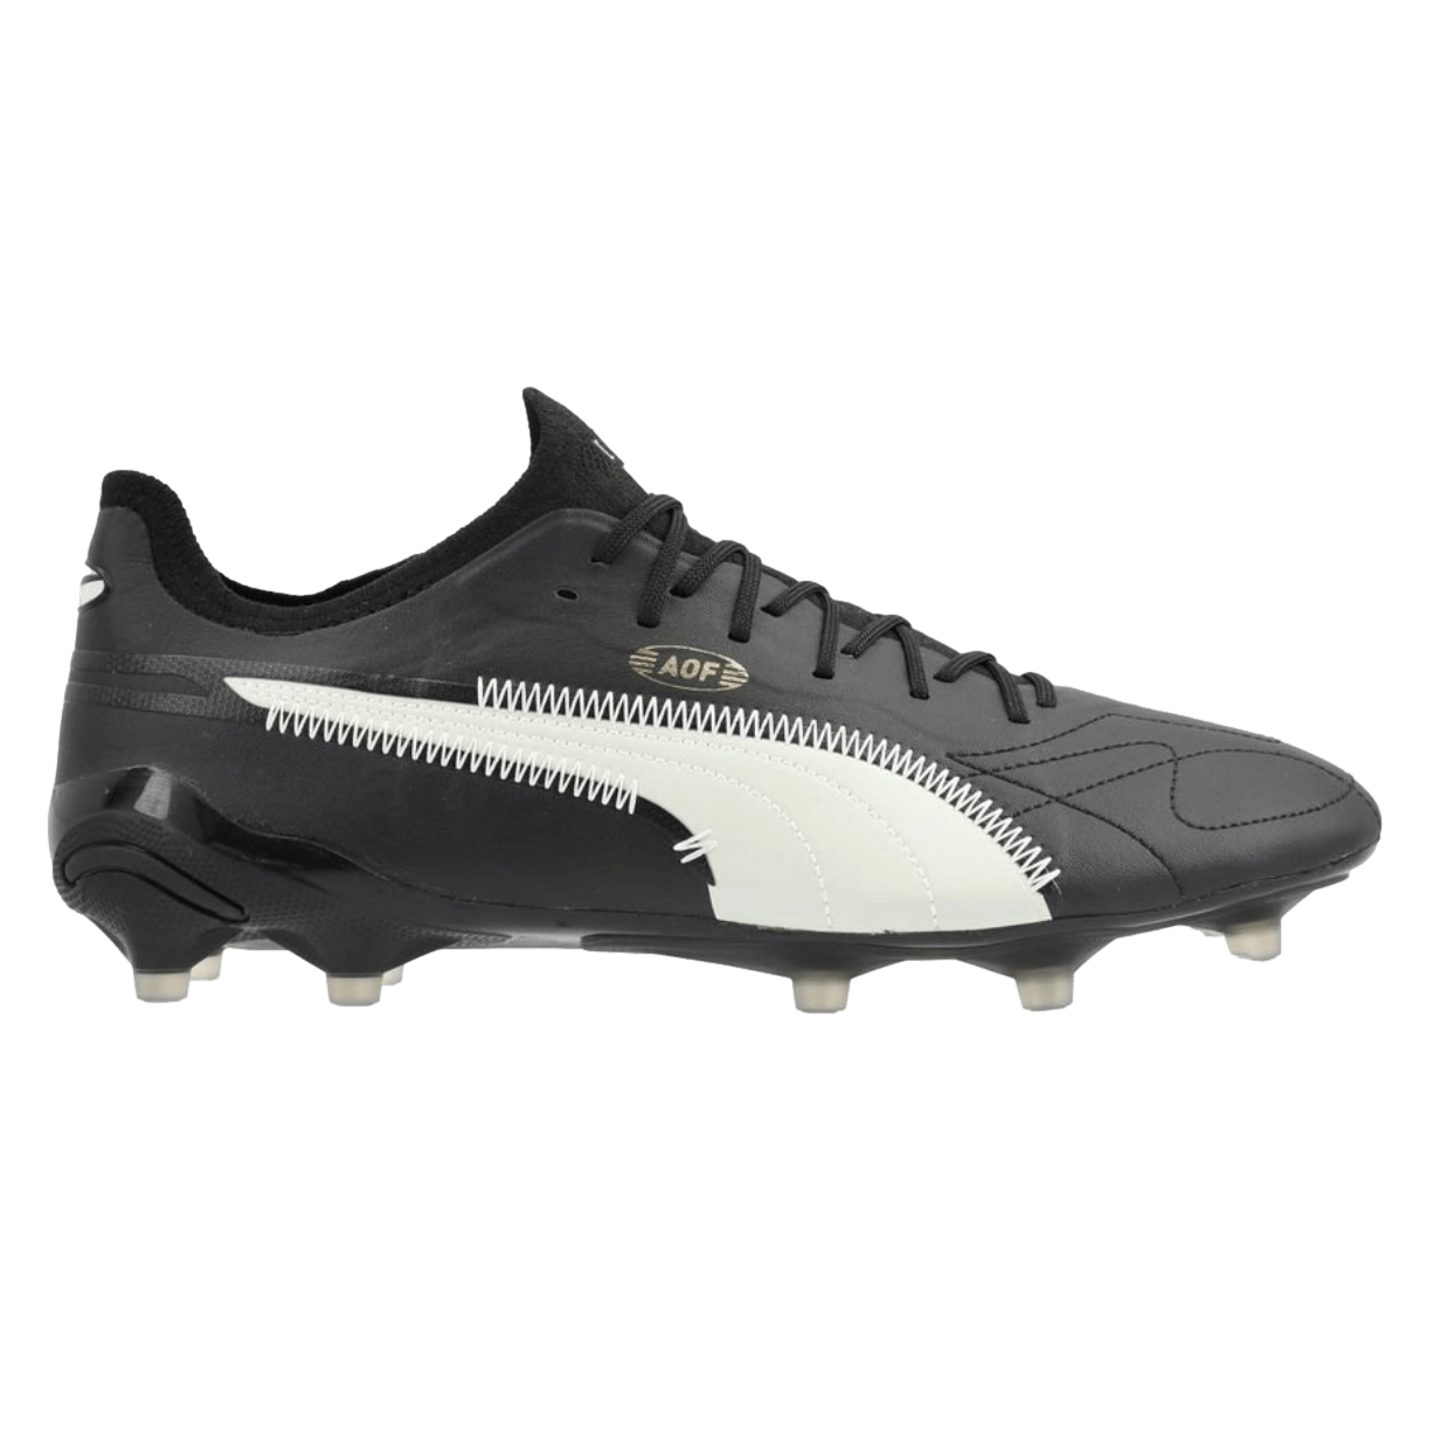 Puma King Ultimate "Art of Football" Firm Ground Cleats